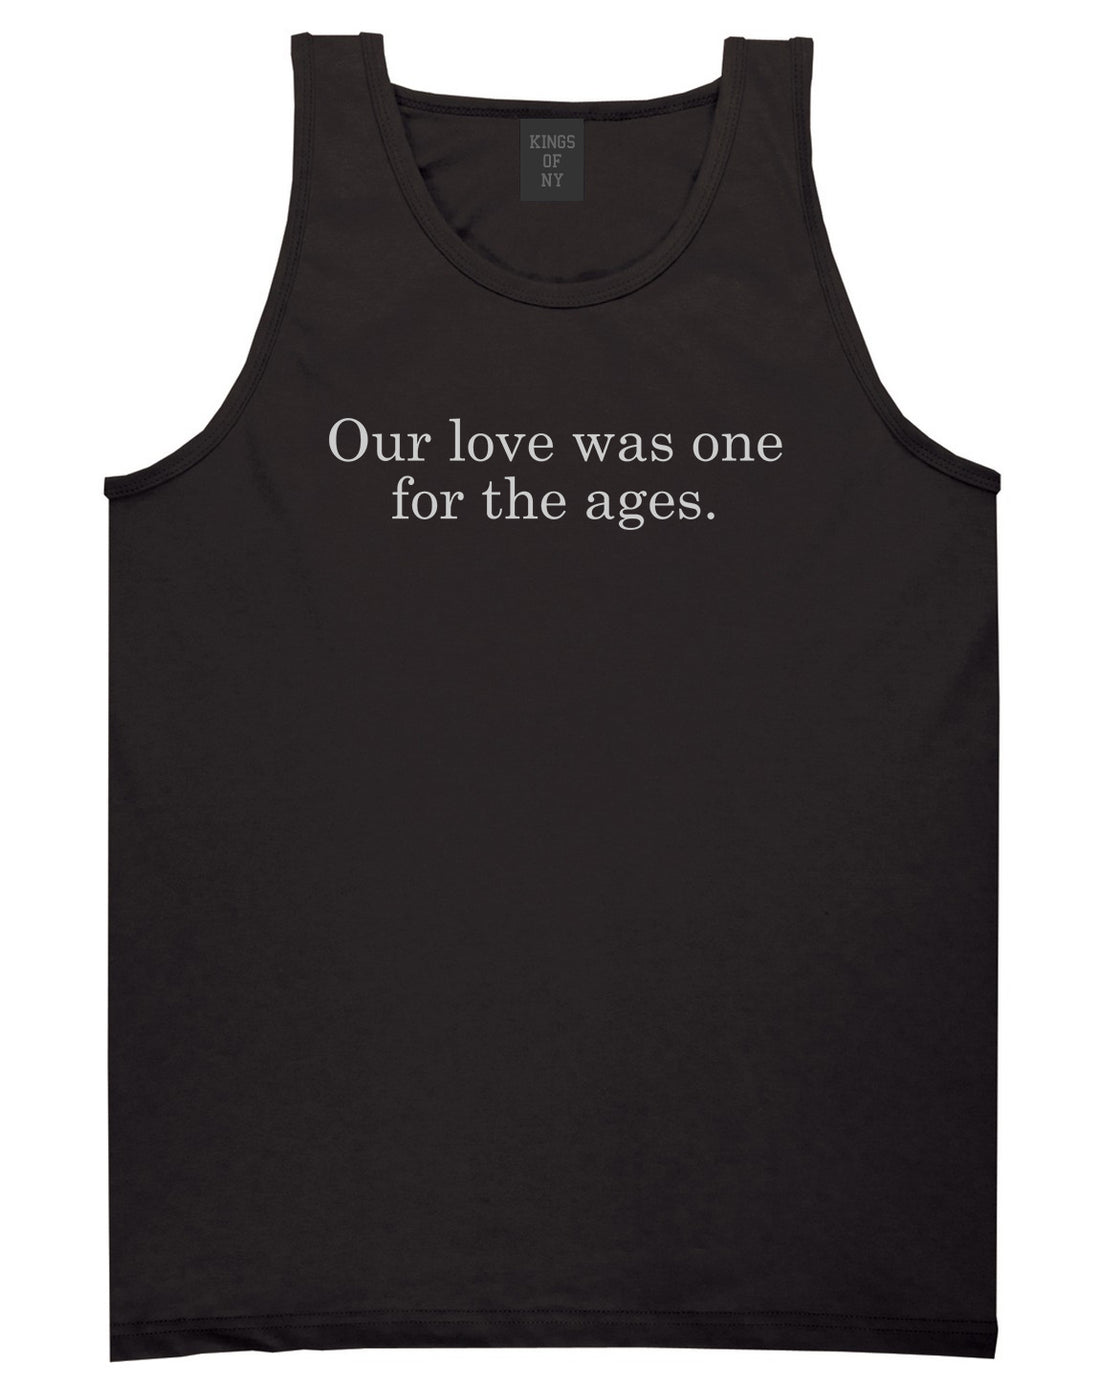 Our Love Quote T-Shirt in Black